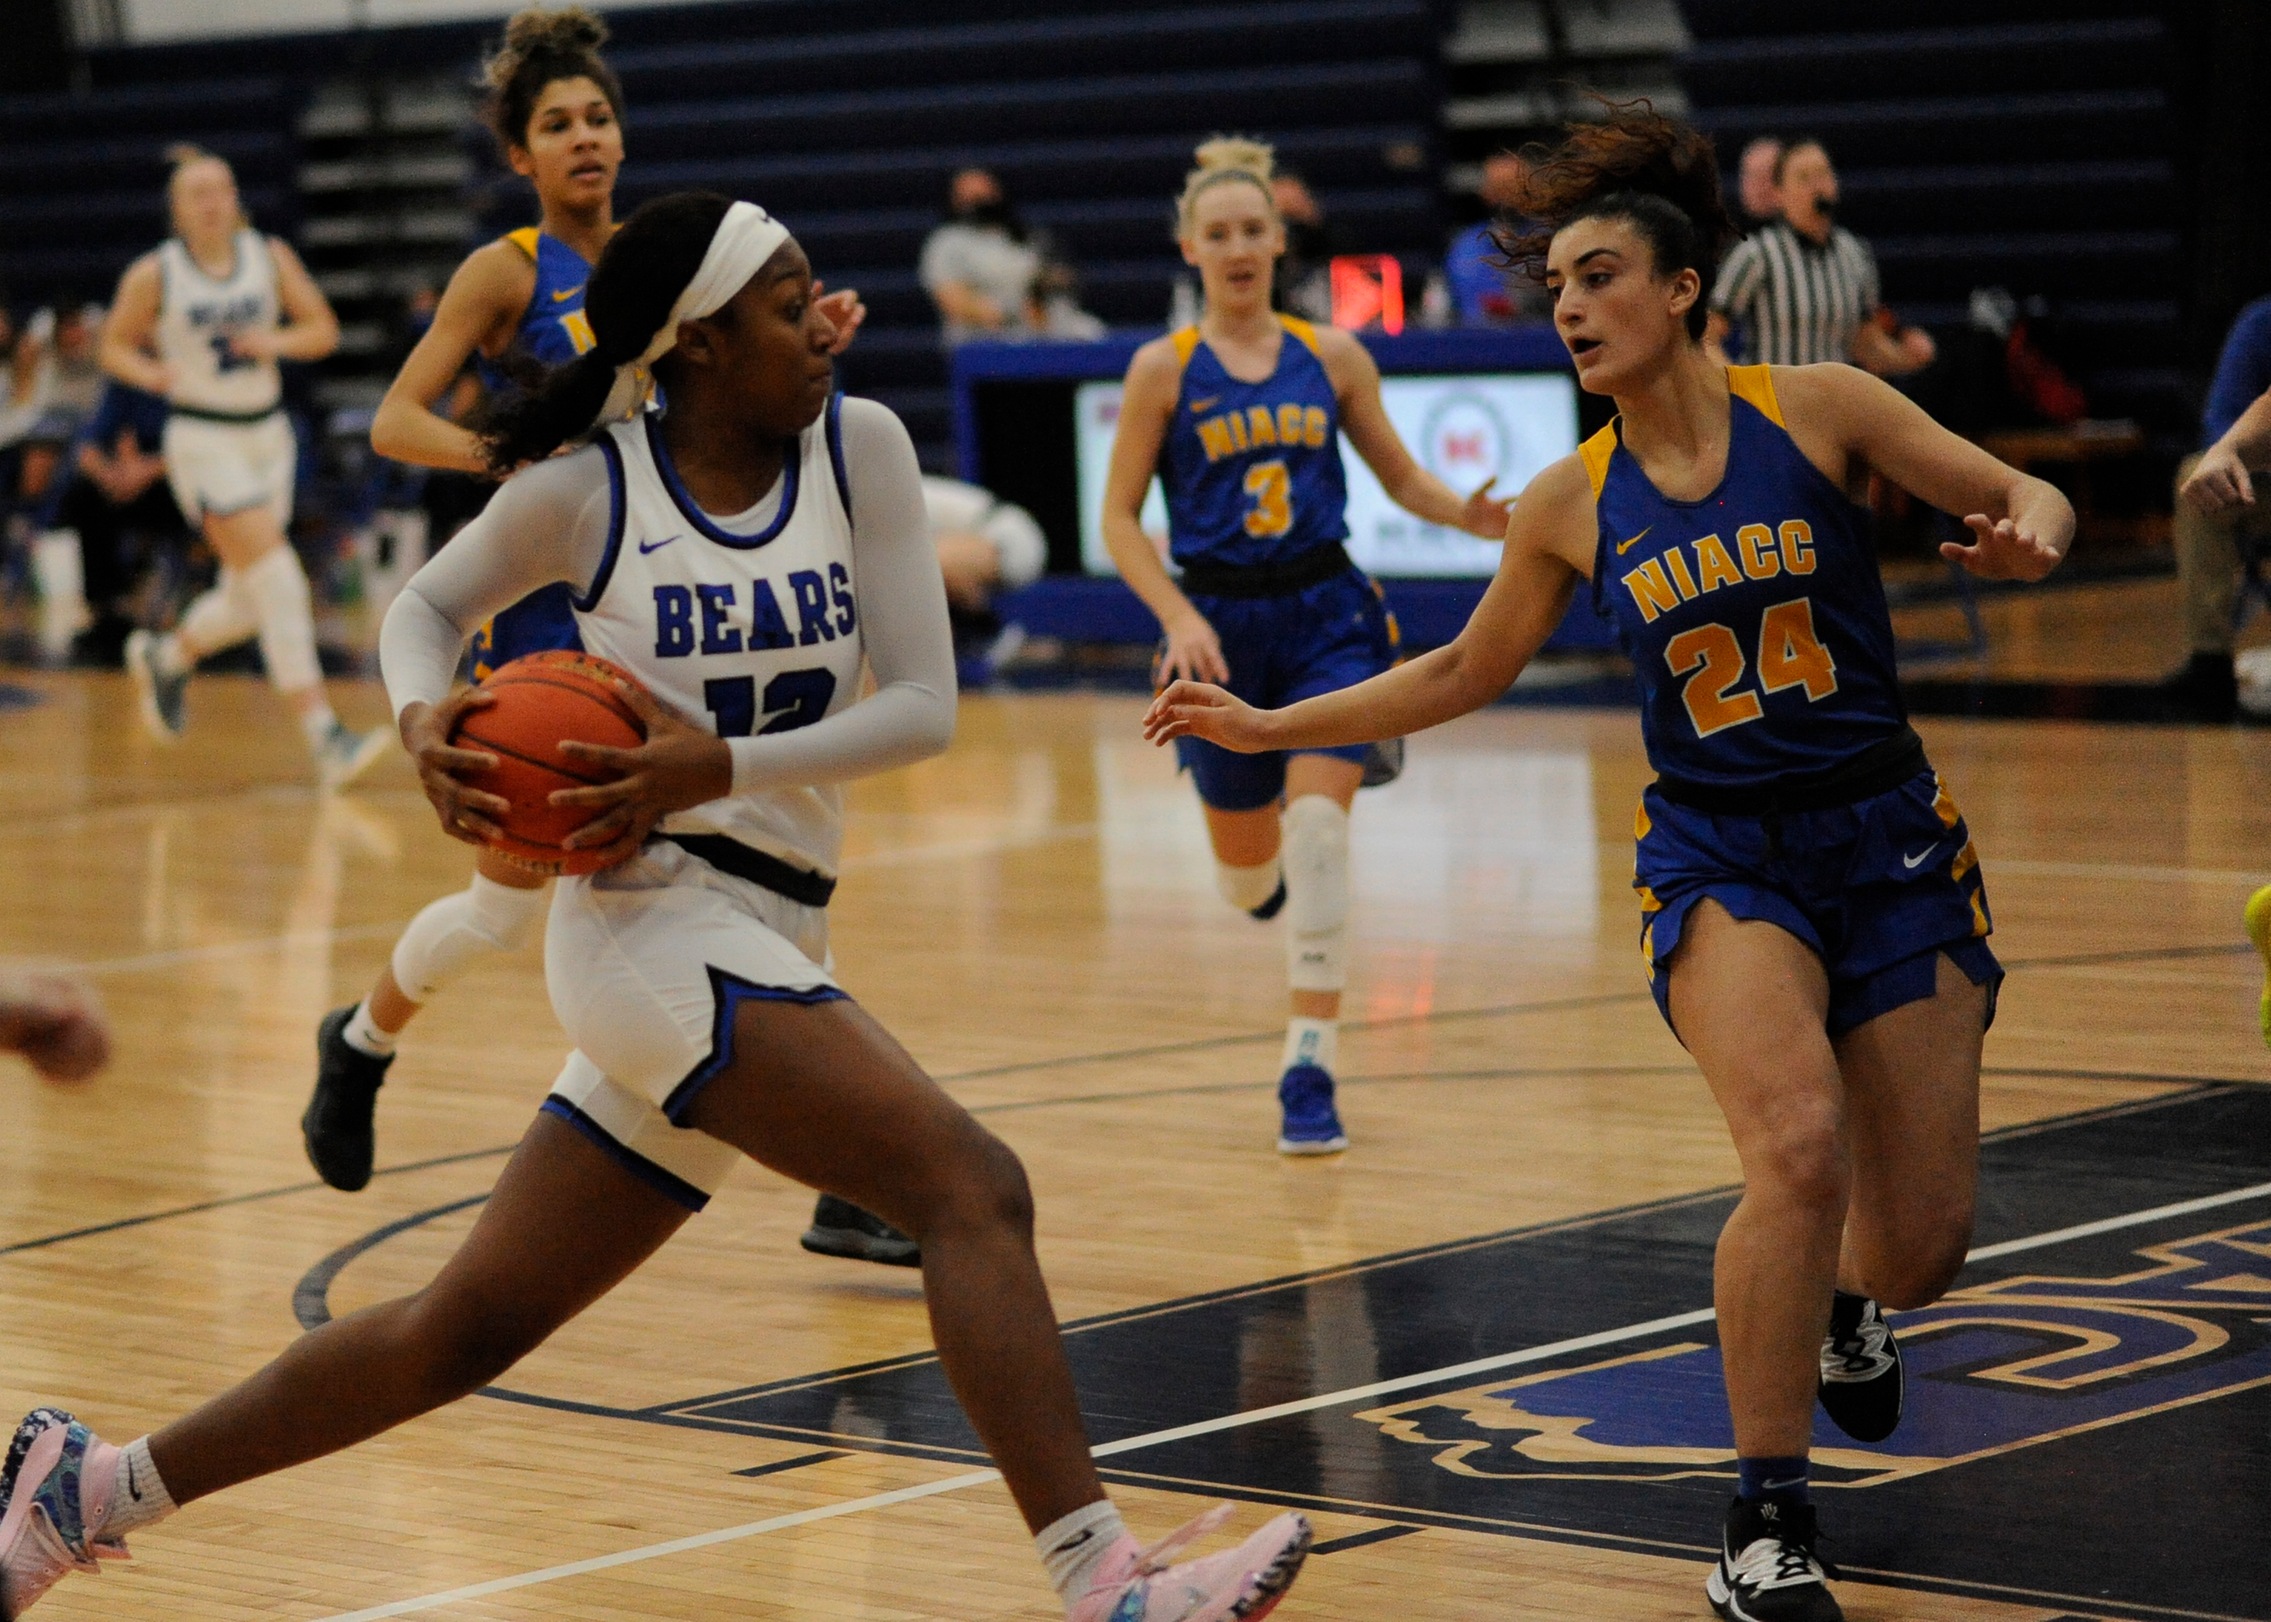 Loss to IWCC ends eight-game winning streak for DMACC women's basketball team